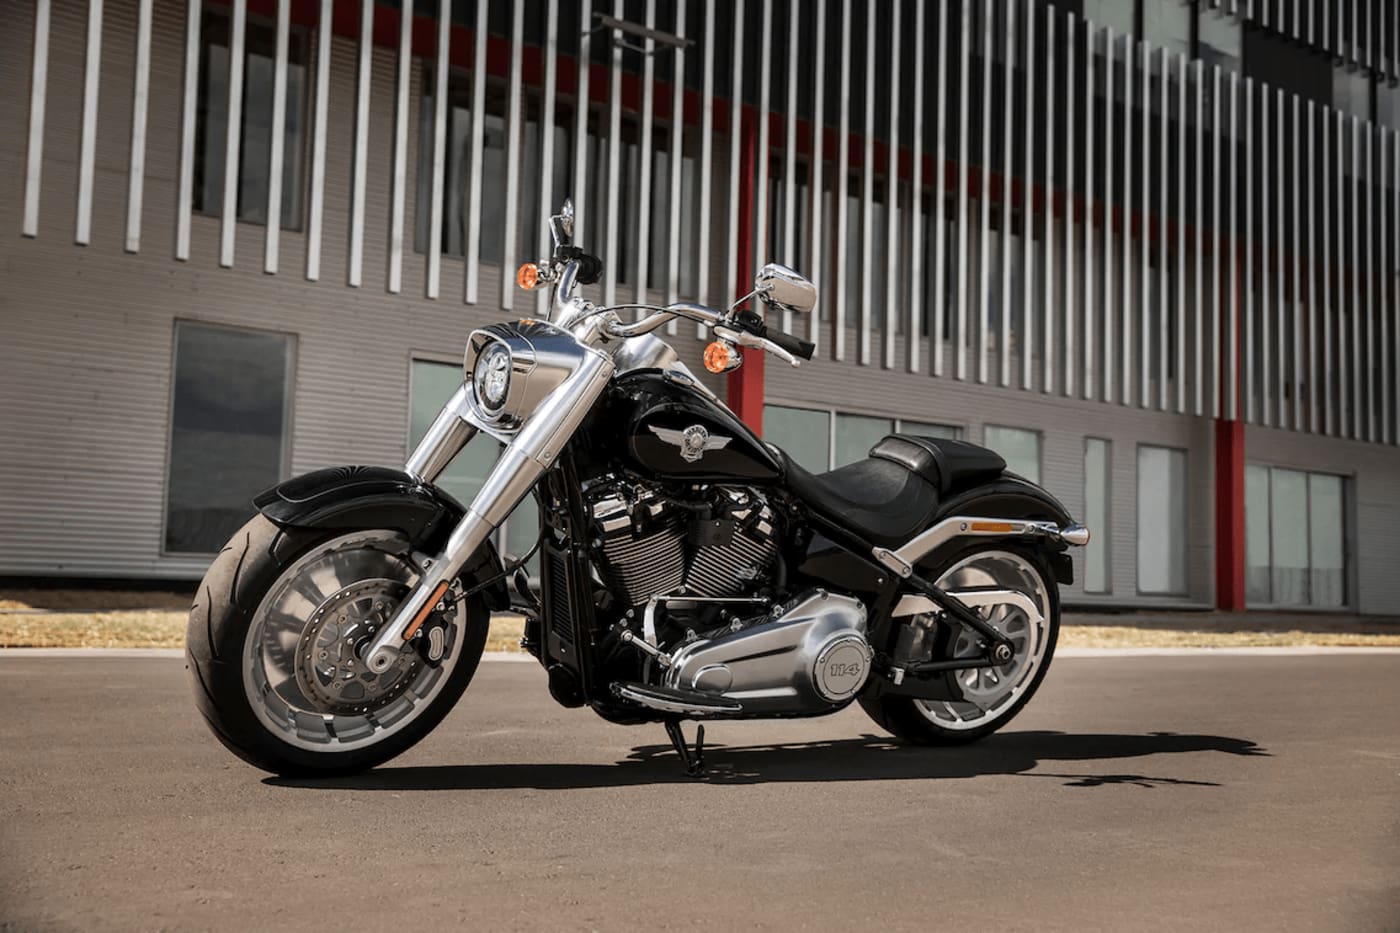 Harley Davidson Announced Big Discounts On My2020 Models In India